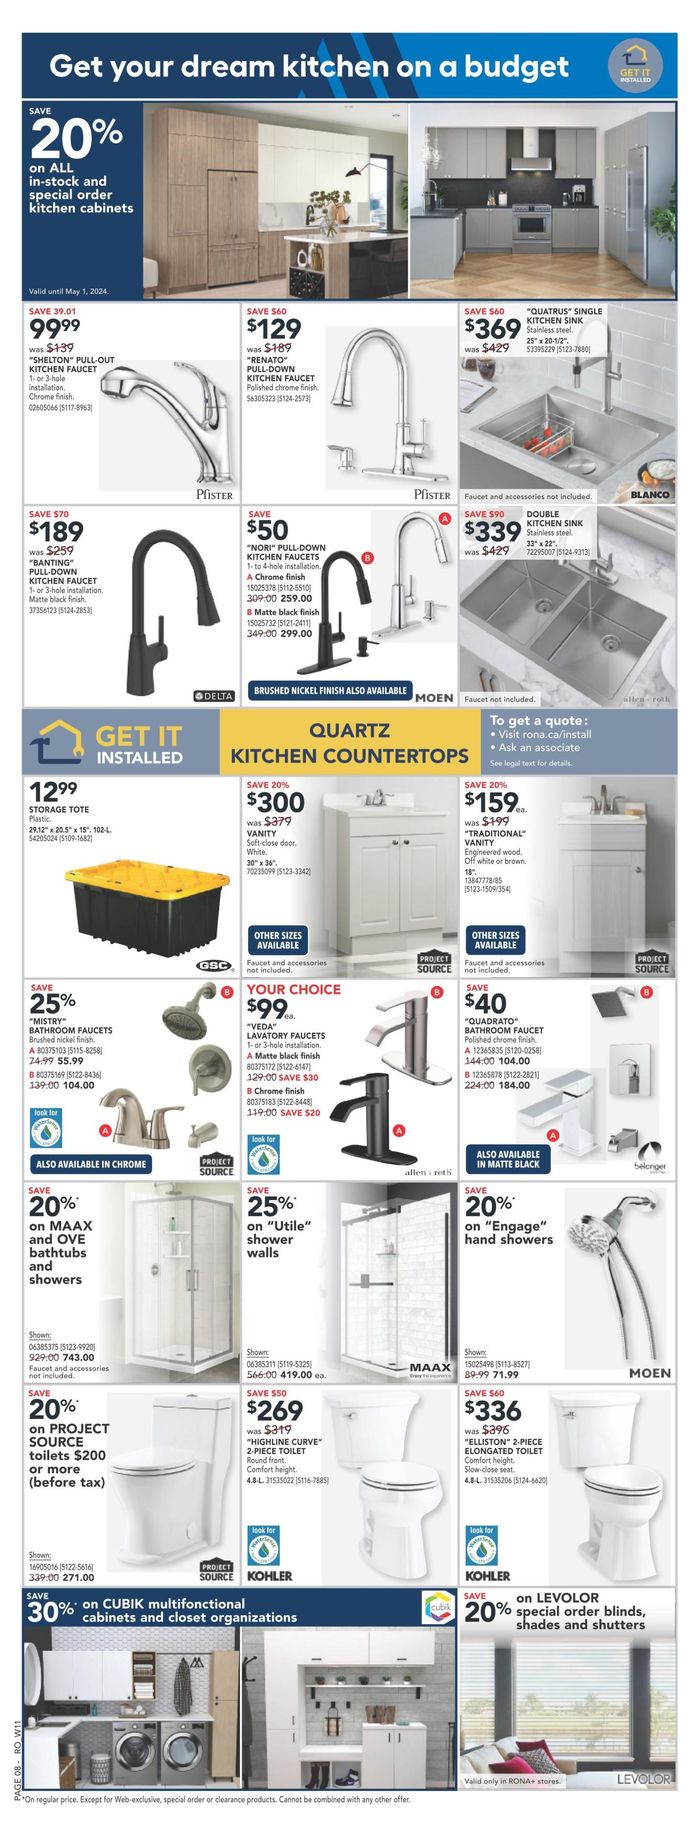 RONA catalogue in Calgary | Start Spring For Less | 2024-04-18 - 2024-04-24